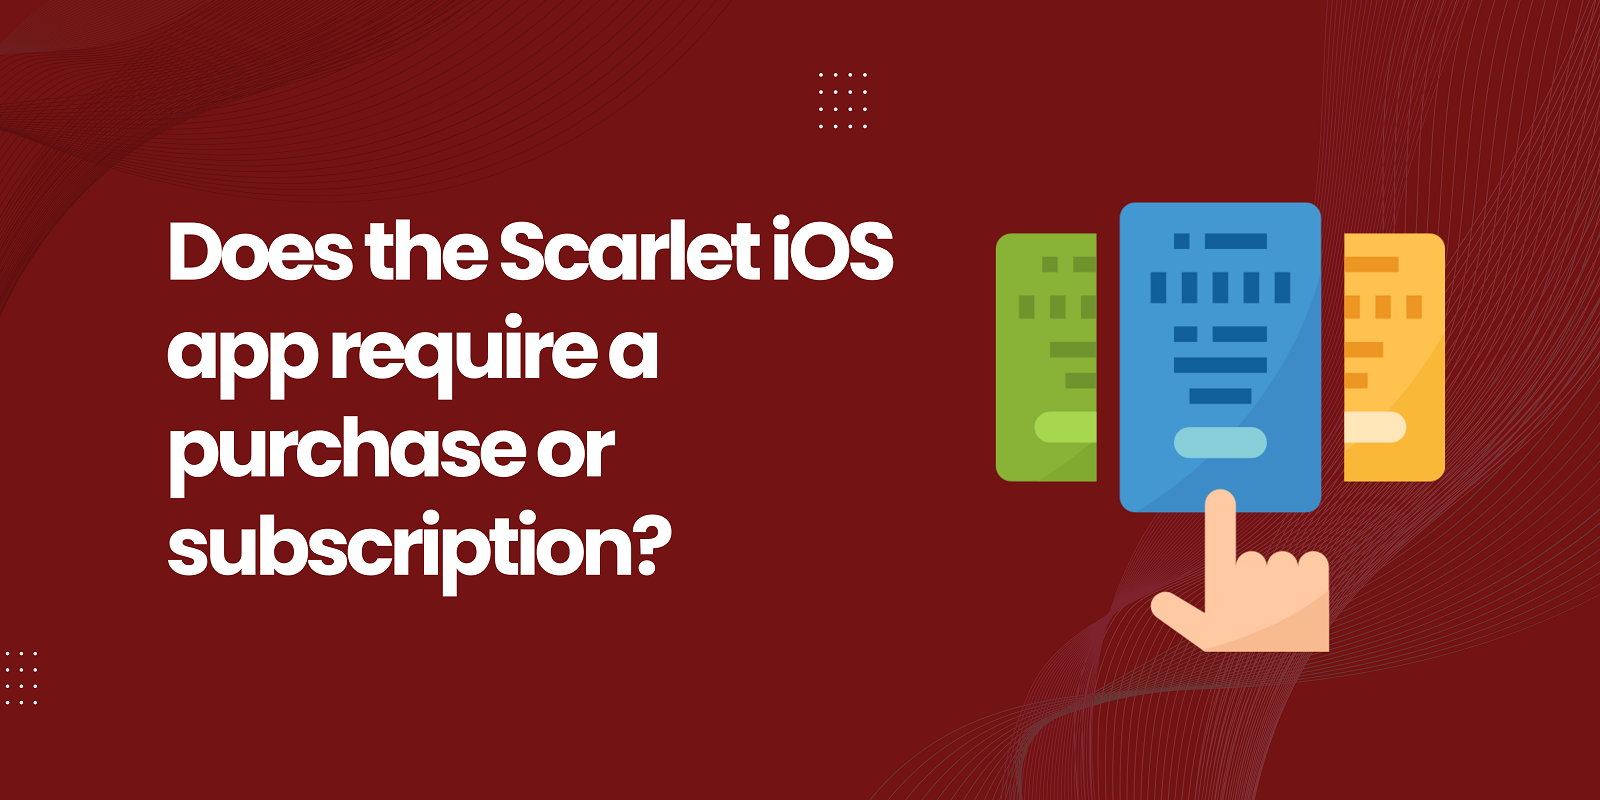 Does the Scarlet iOS app require a subscription plan?